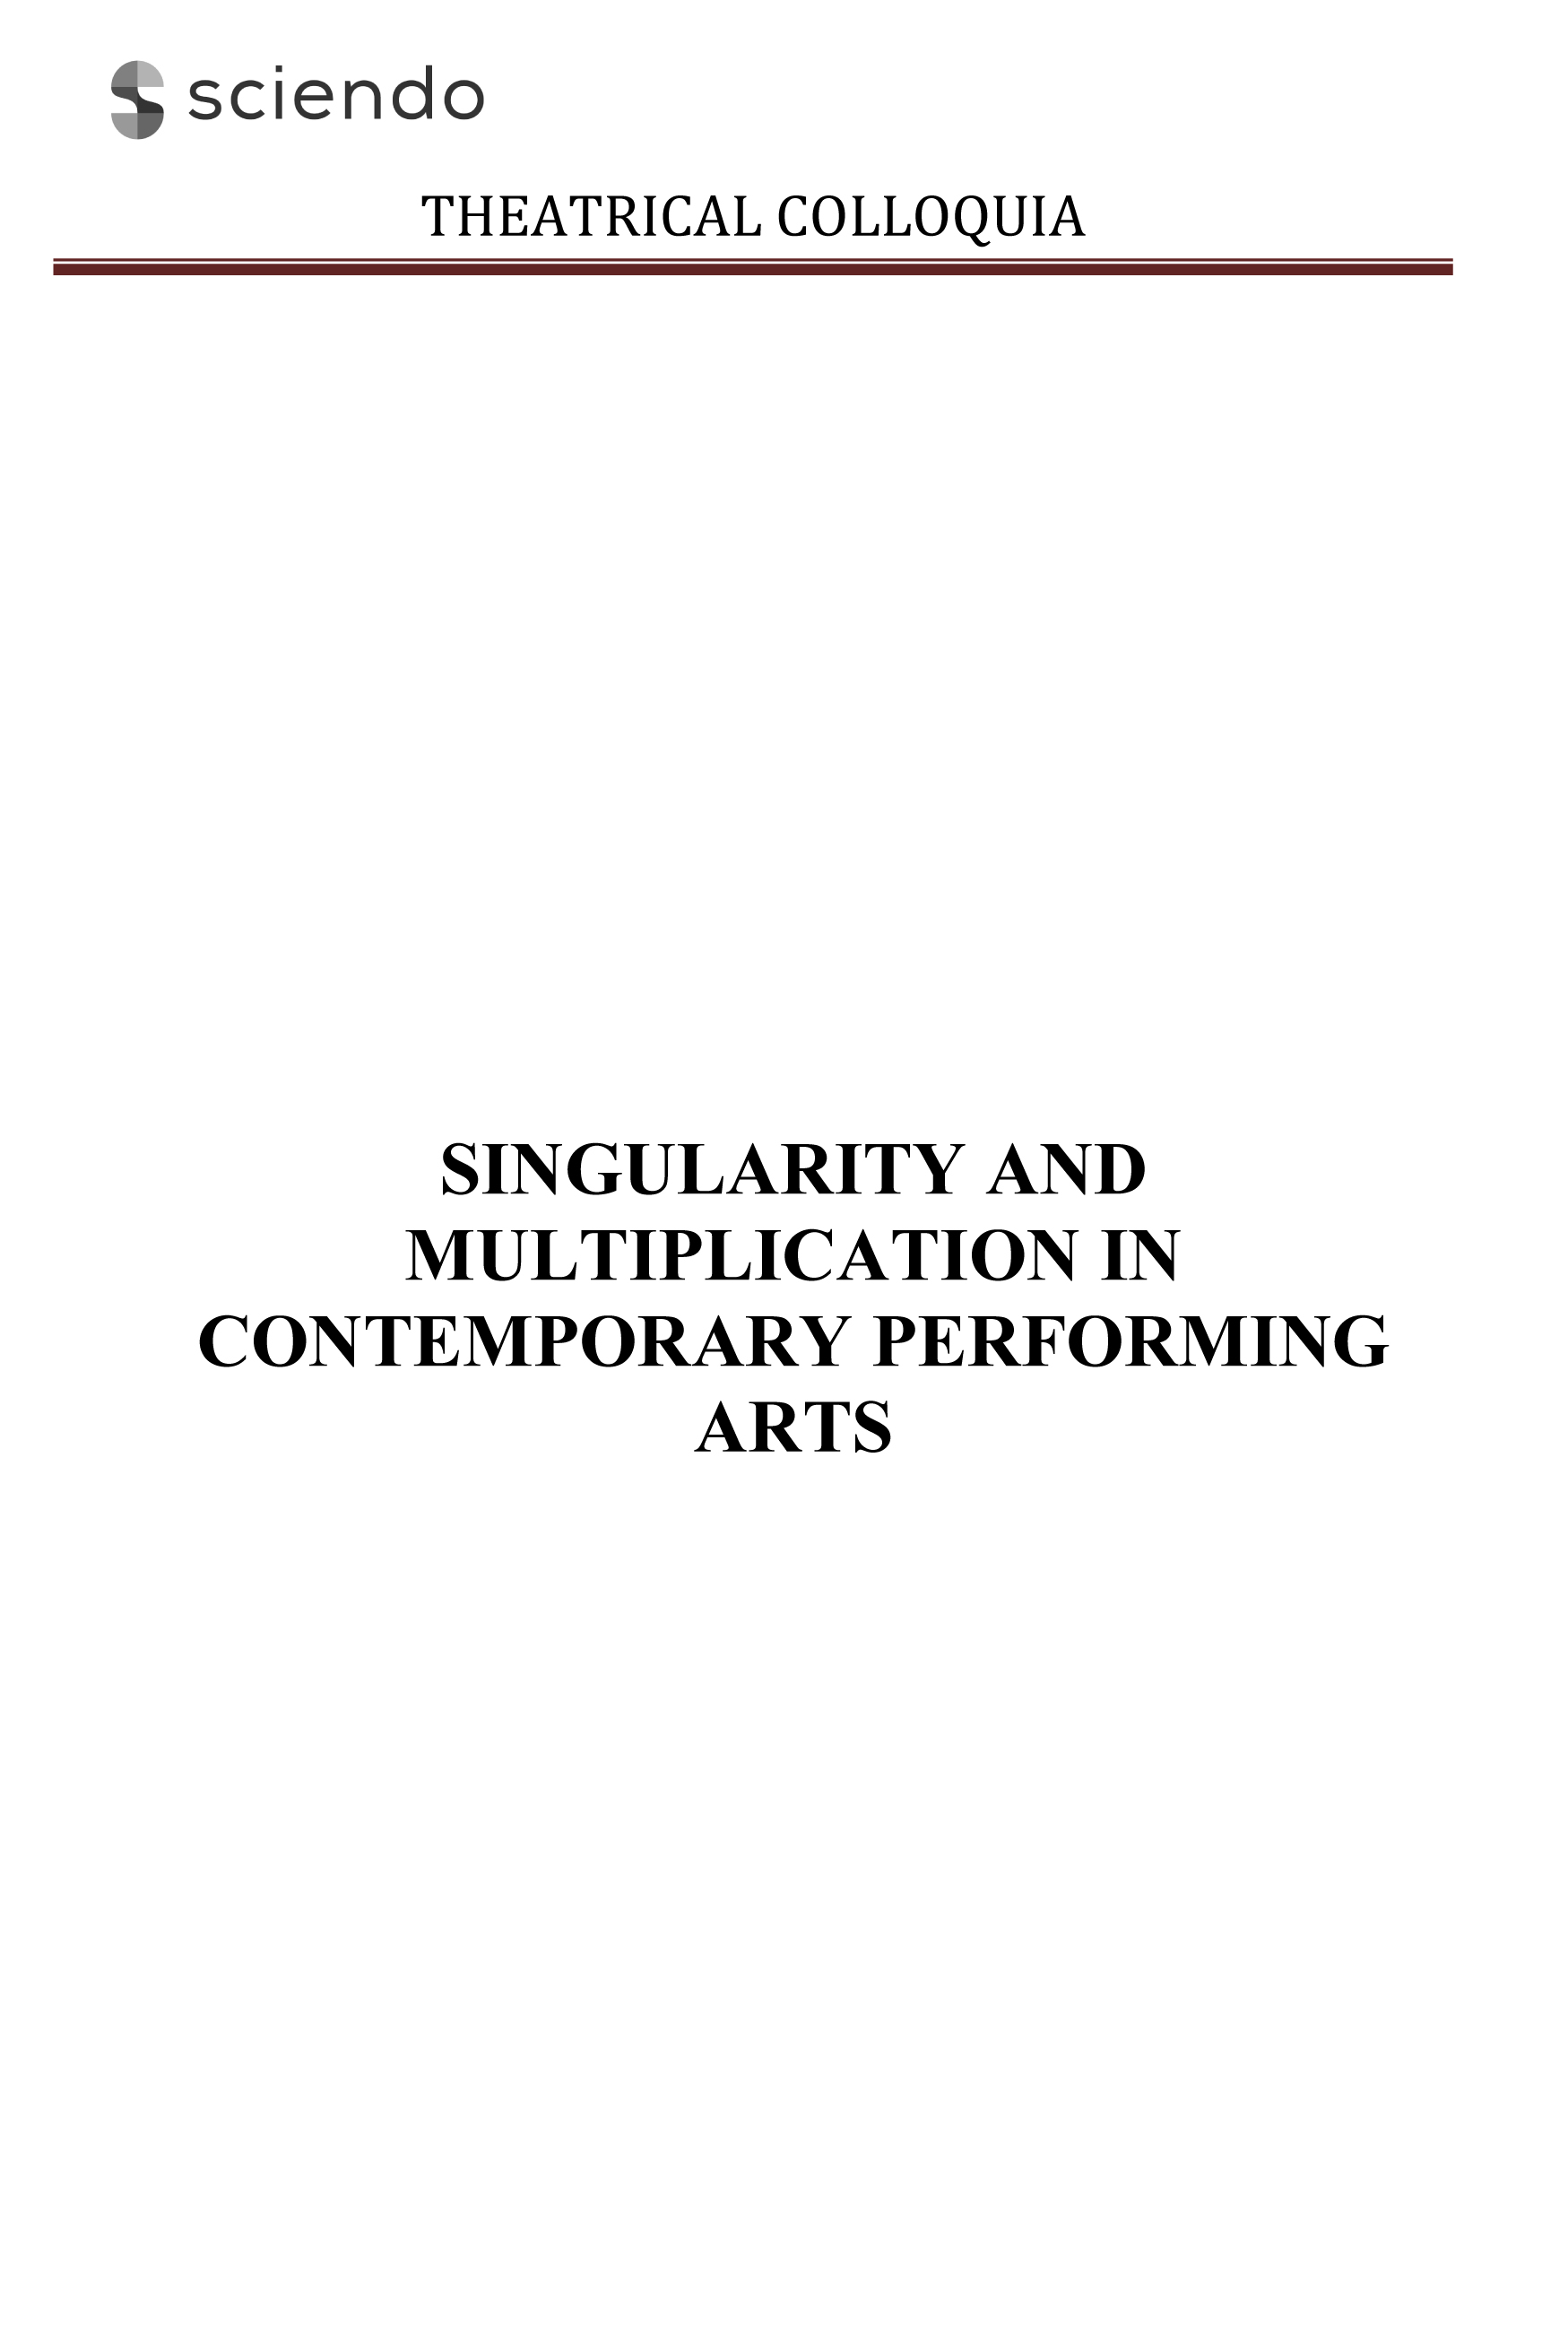 Particularity and Proliferation of Stroboscopic Elements in the Visual, Performing and Cinematographic Arts